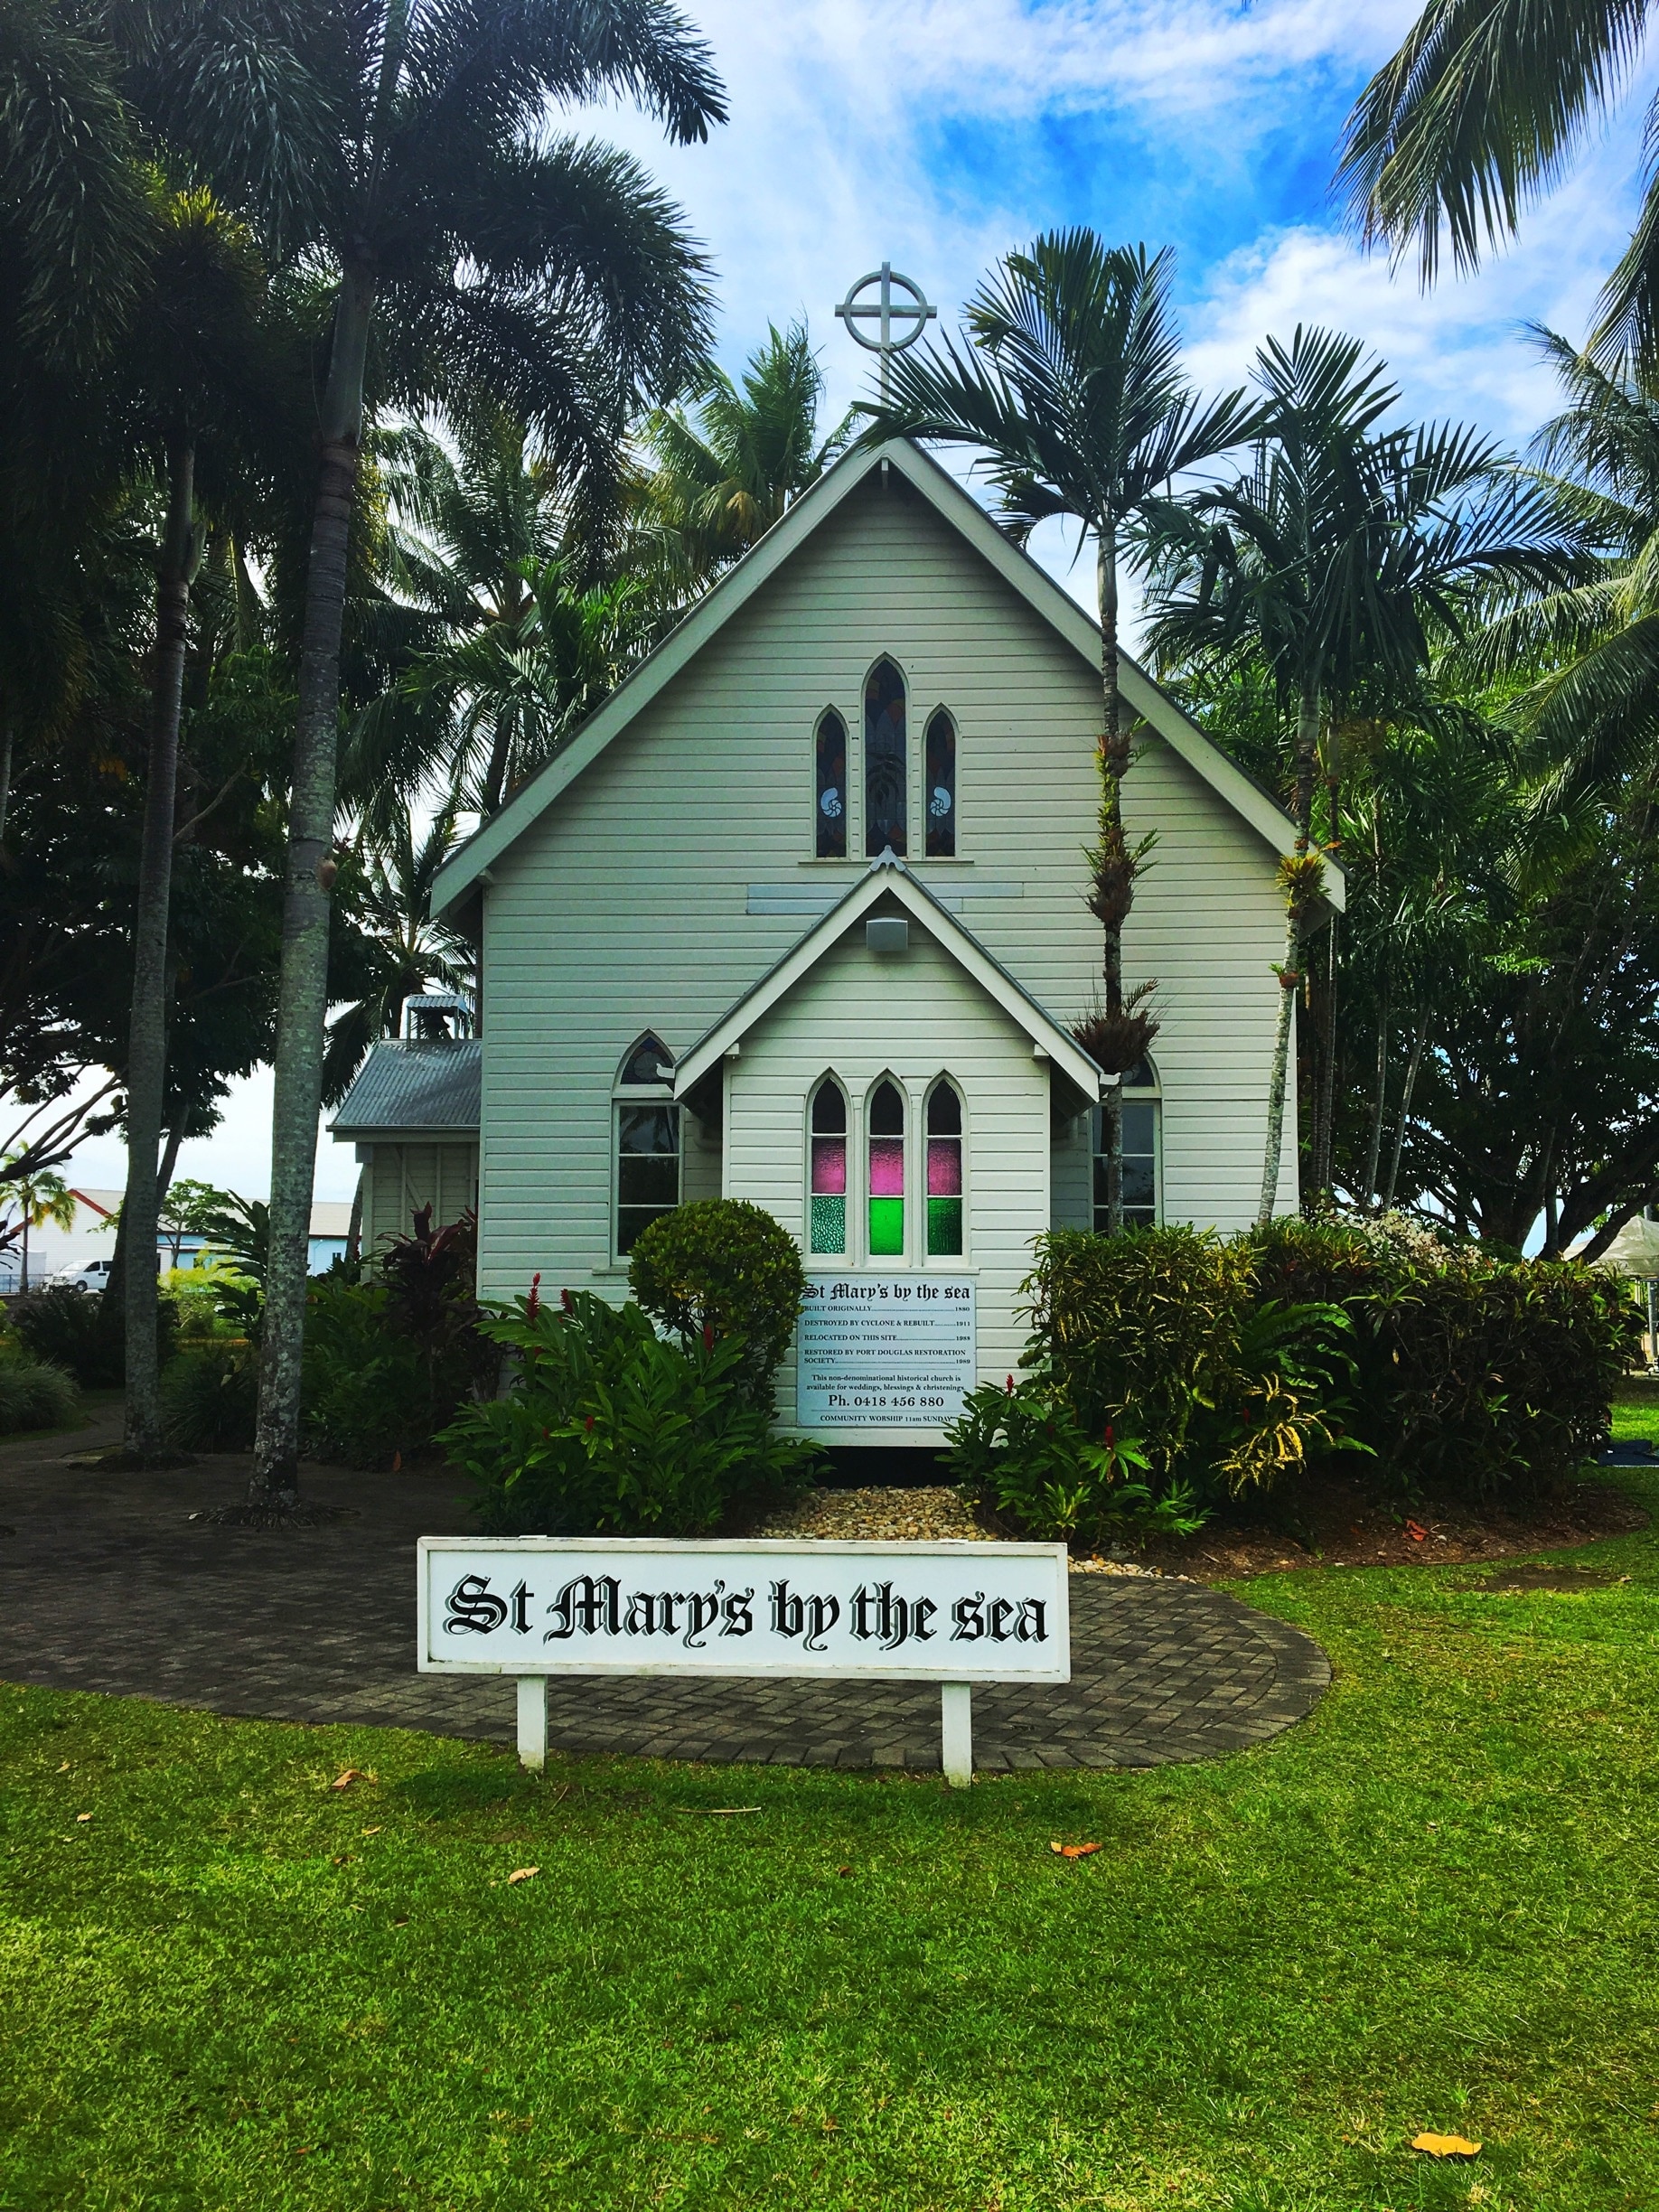 A beautiful old church right on the water in Port Douglas Queensland. A hold over from the old days before all the resorts and development.
#green #churches #queensland #australia